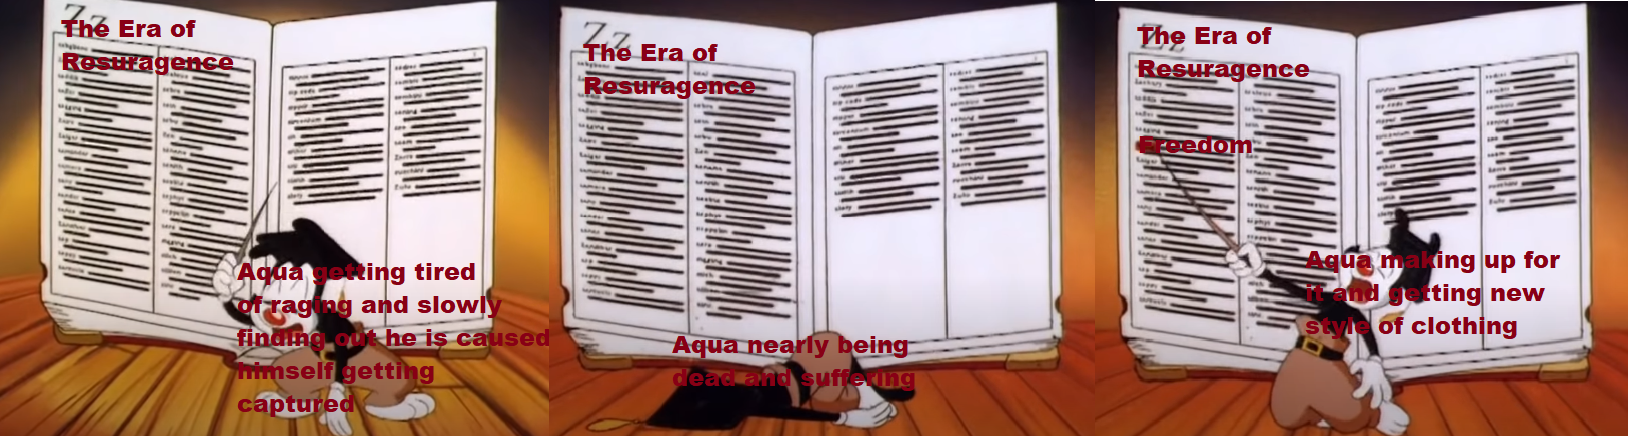 the aniamanics meme without template.png